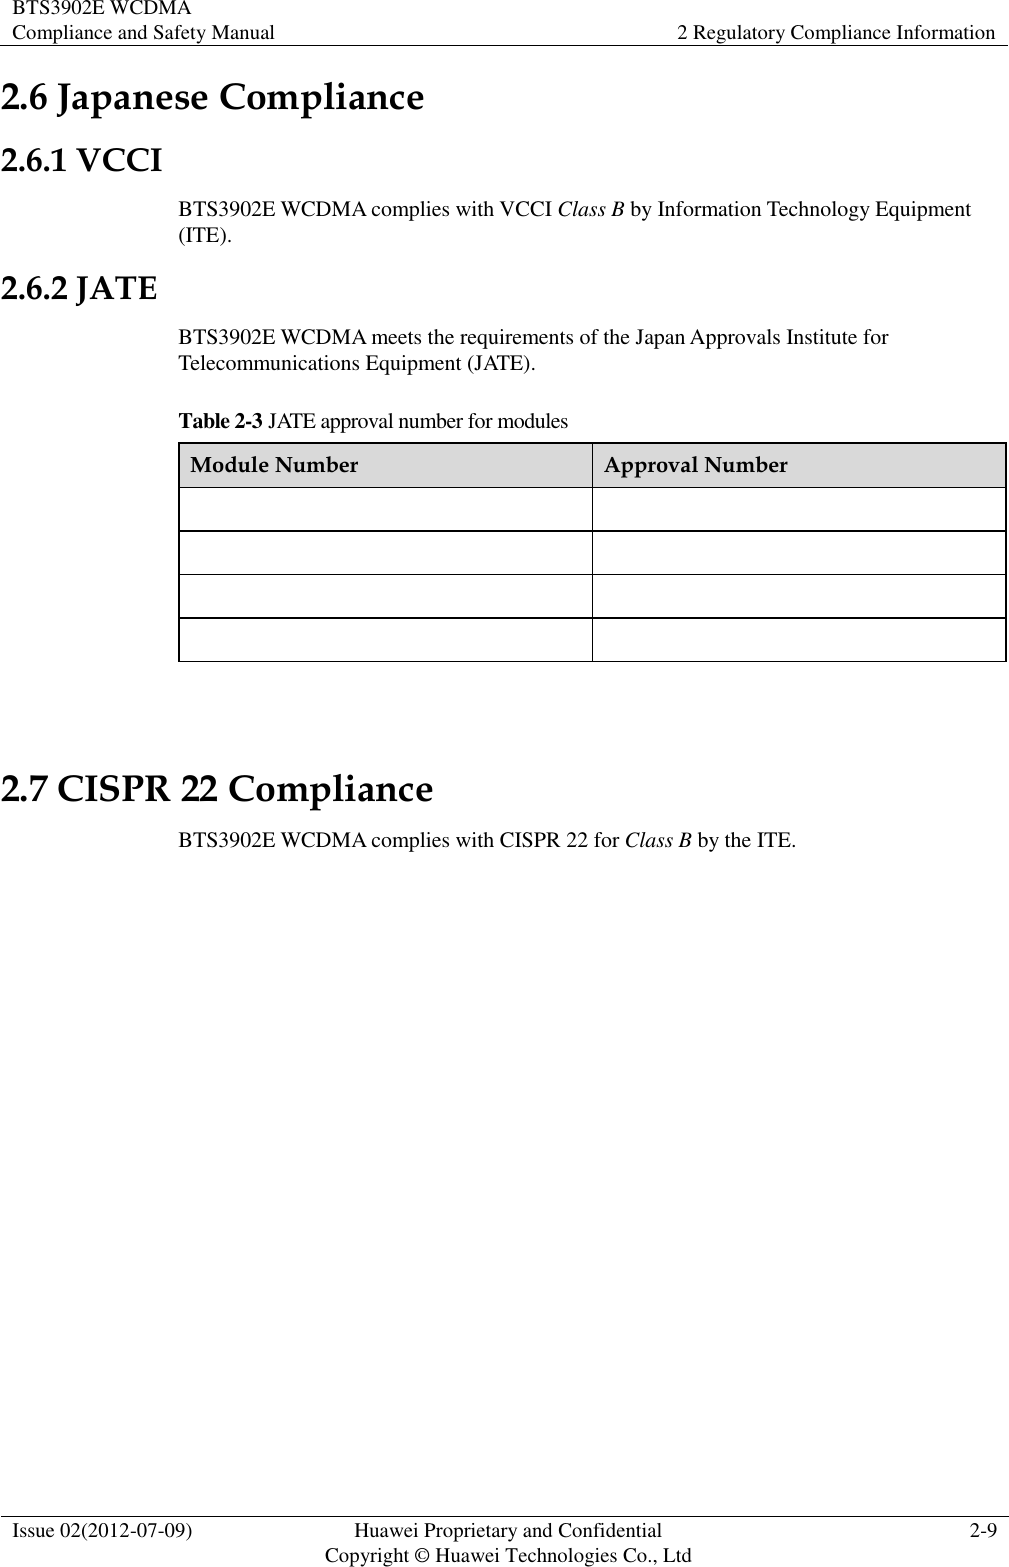 BTS3902E WCDMA Compliance and Safety Manual 2 Regulatory Compliance Information  Issue 02(2012-07-09) Huawei Proprietary and Confidential           Copyright © Huawei Technologies Co., Ltd 2-9  2.6 Japanese Compliance 2.6.1 VCCI BTS3902E WCDMA complies with VCCI Class B by Information Technology Equipment (ITE). 2.6.2 JATE BTS3902E WCDMA meets the requirements of the Japan Approvals Institute for Telecommunications Equipment (JATE). Table 2-3 JATE approval number for modules Module Number Approval Number          2.7 CISPR 22 Compliance BTS3902E WCDMA complies with CISPR 22 for Class B by the ITE. 